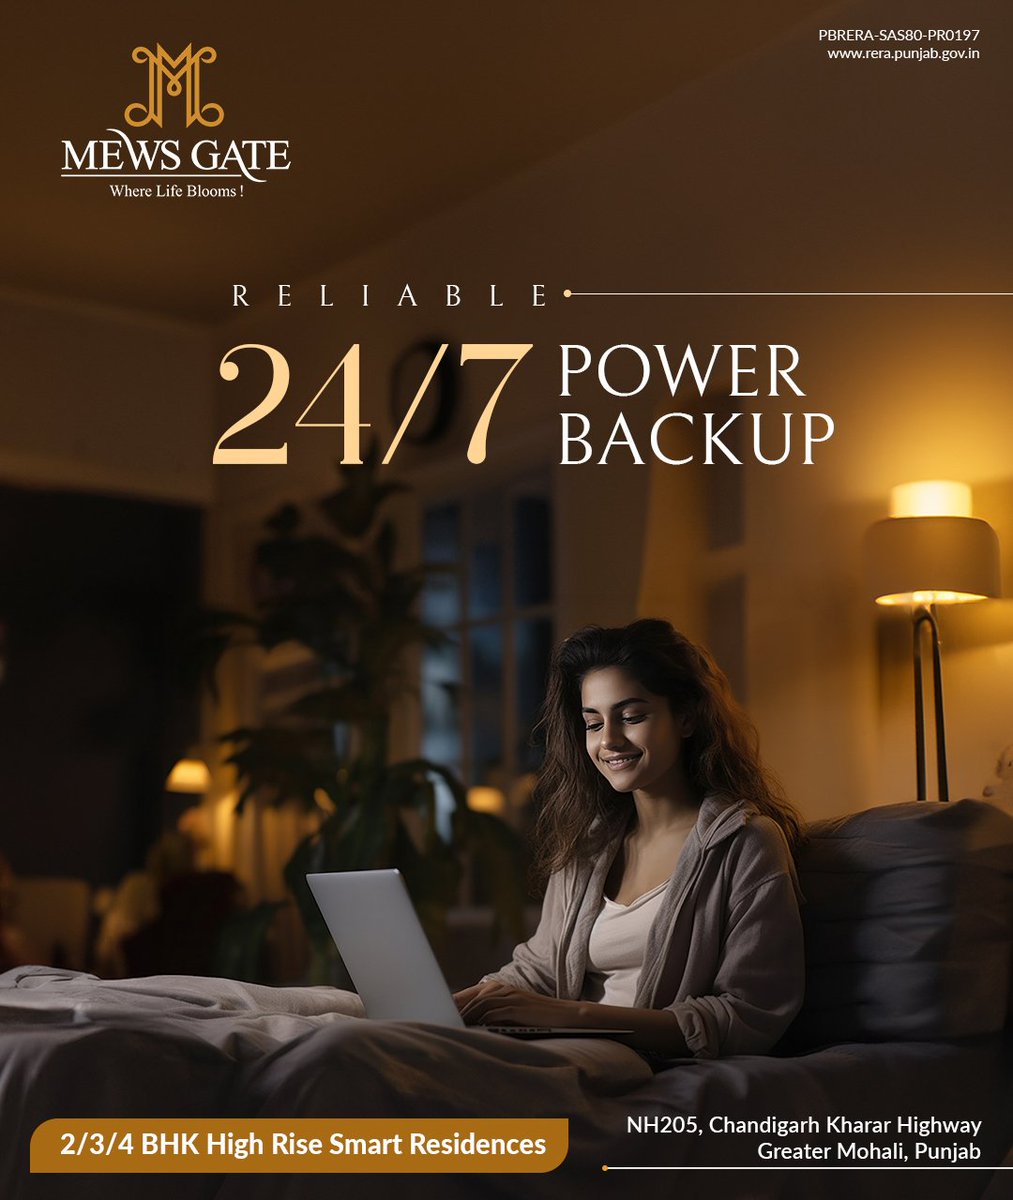 Power outages are a thing of the past. -24*7 Power Backup 🏠2/3/4 BHK High-Rise Smart Residences at Mews Gate 📍NH 205, Chandigarh Kharar Highway Greater Mohali, Punjab ↘️Call us at 90695-90695 #MewsGate #PowerSolutions #ModernLiving #BackupPower